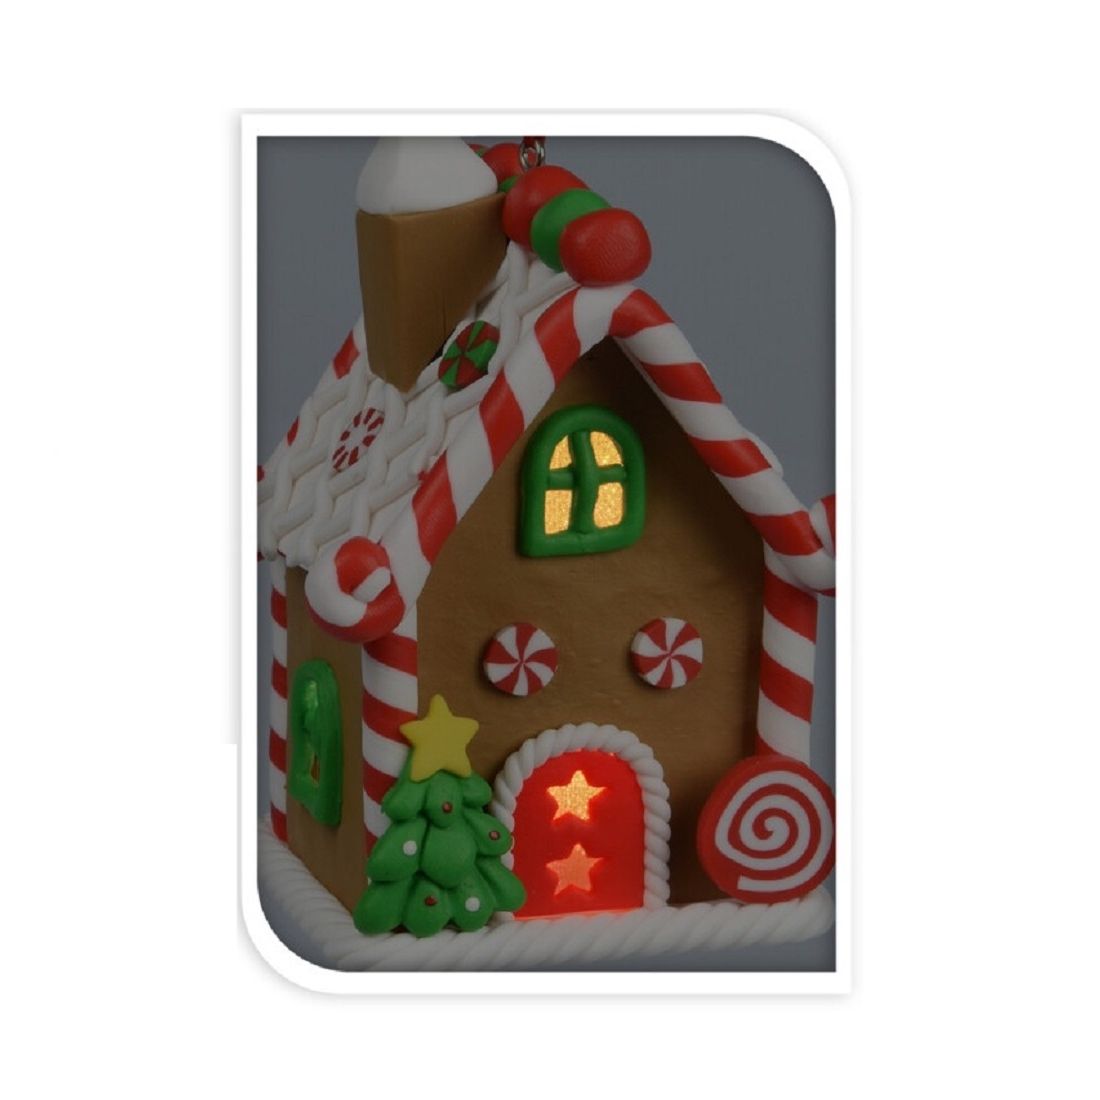 Christmas Hanging Gingerbread House Ornament with Colour Changing LED